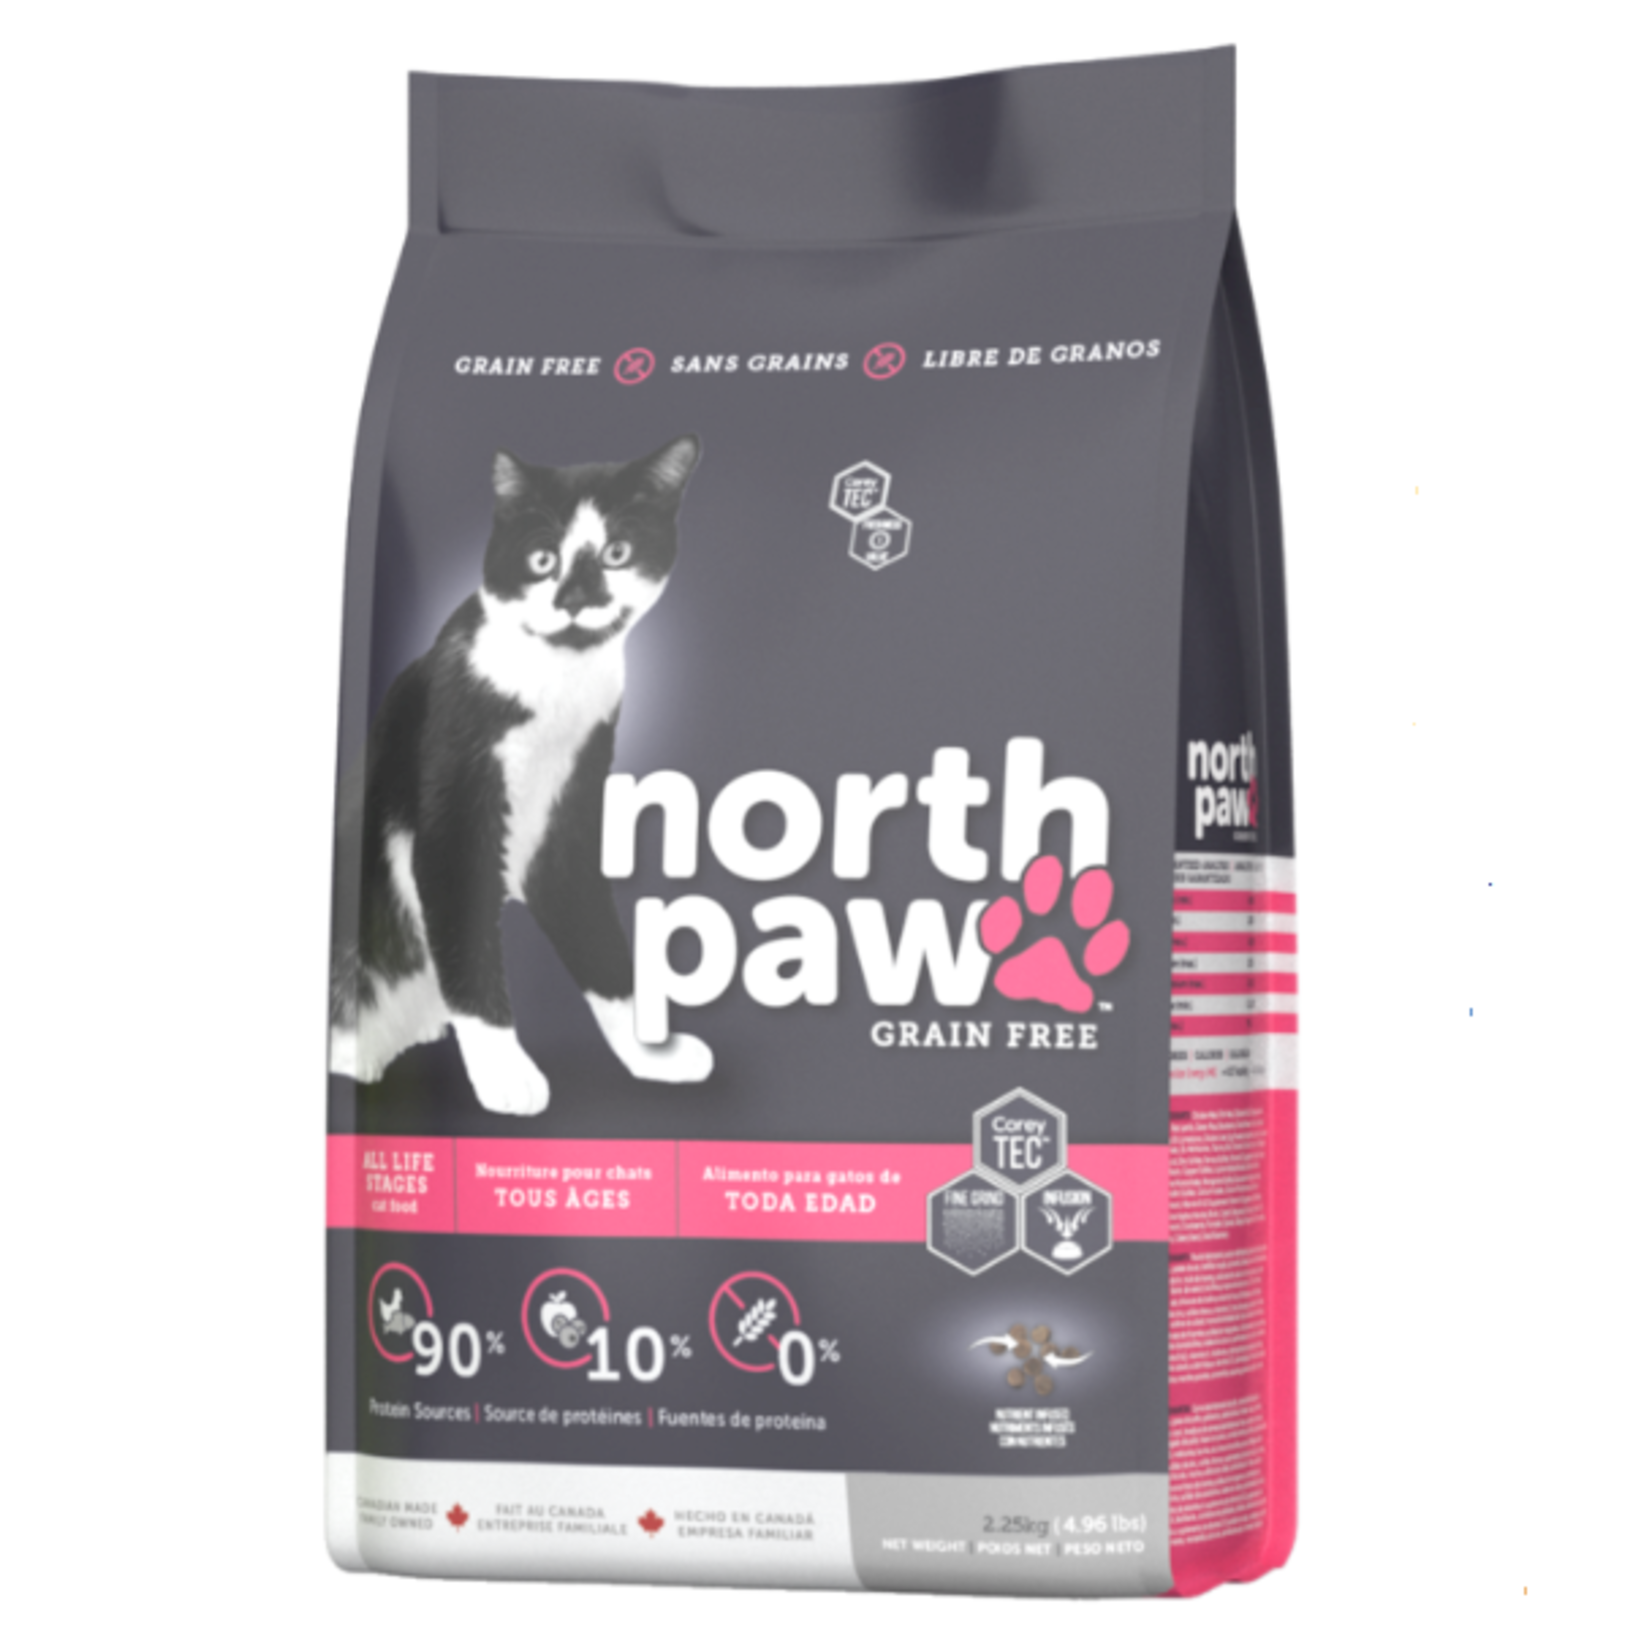 North Paw All Life Stages - G Free - 6 lbs